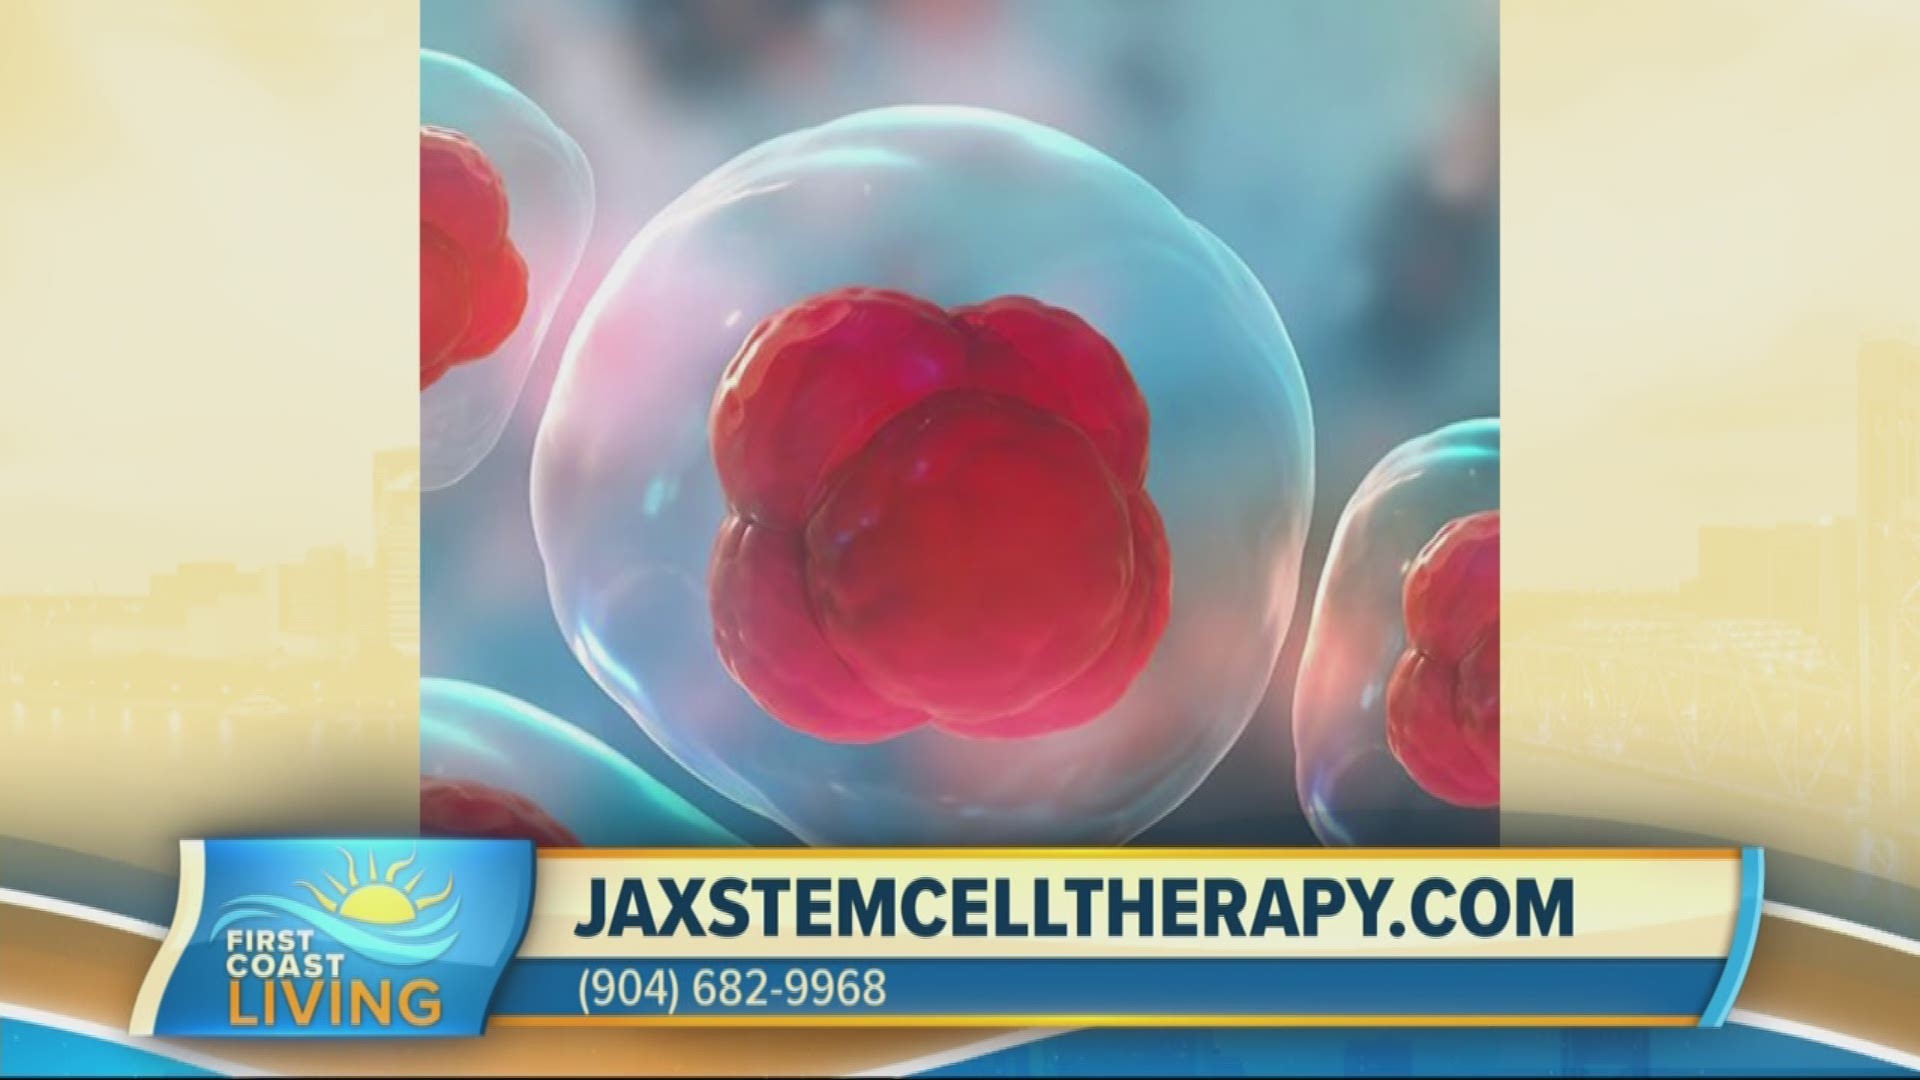 Learn more about how stem cell therapy may help you get rid of chronic joint pain.